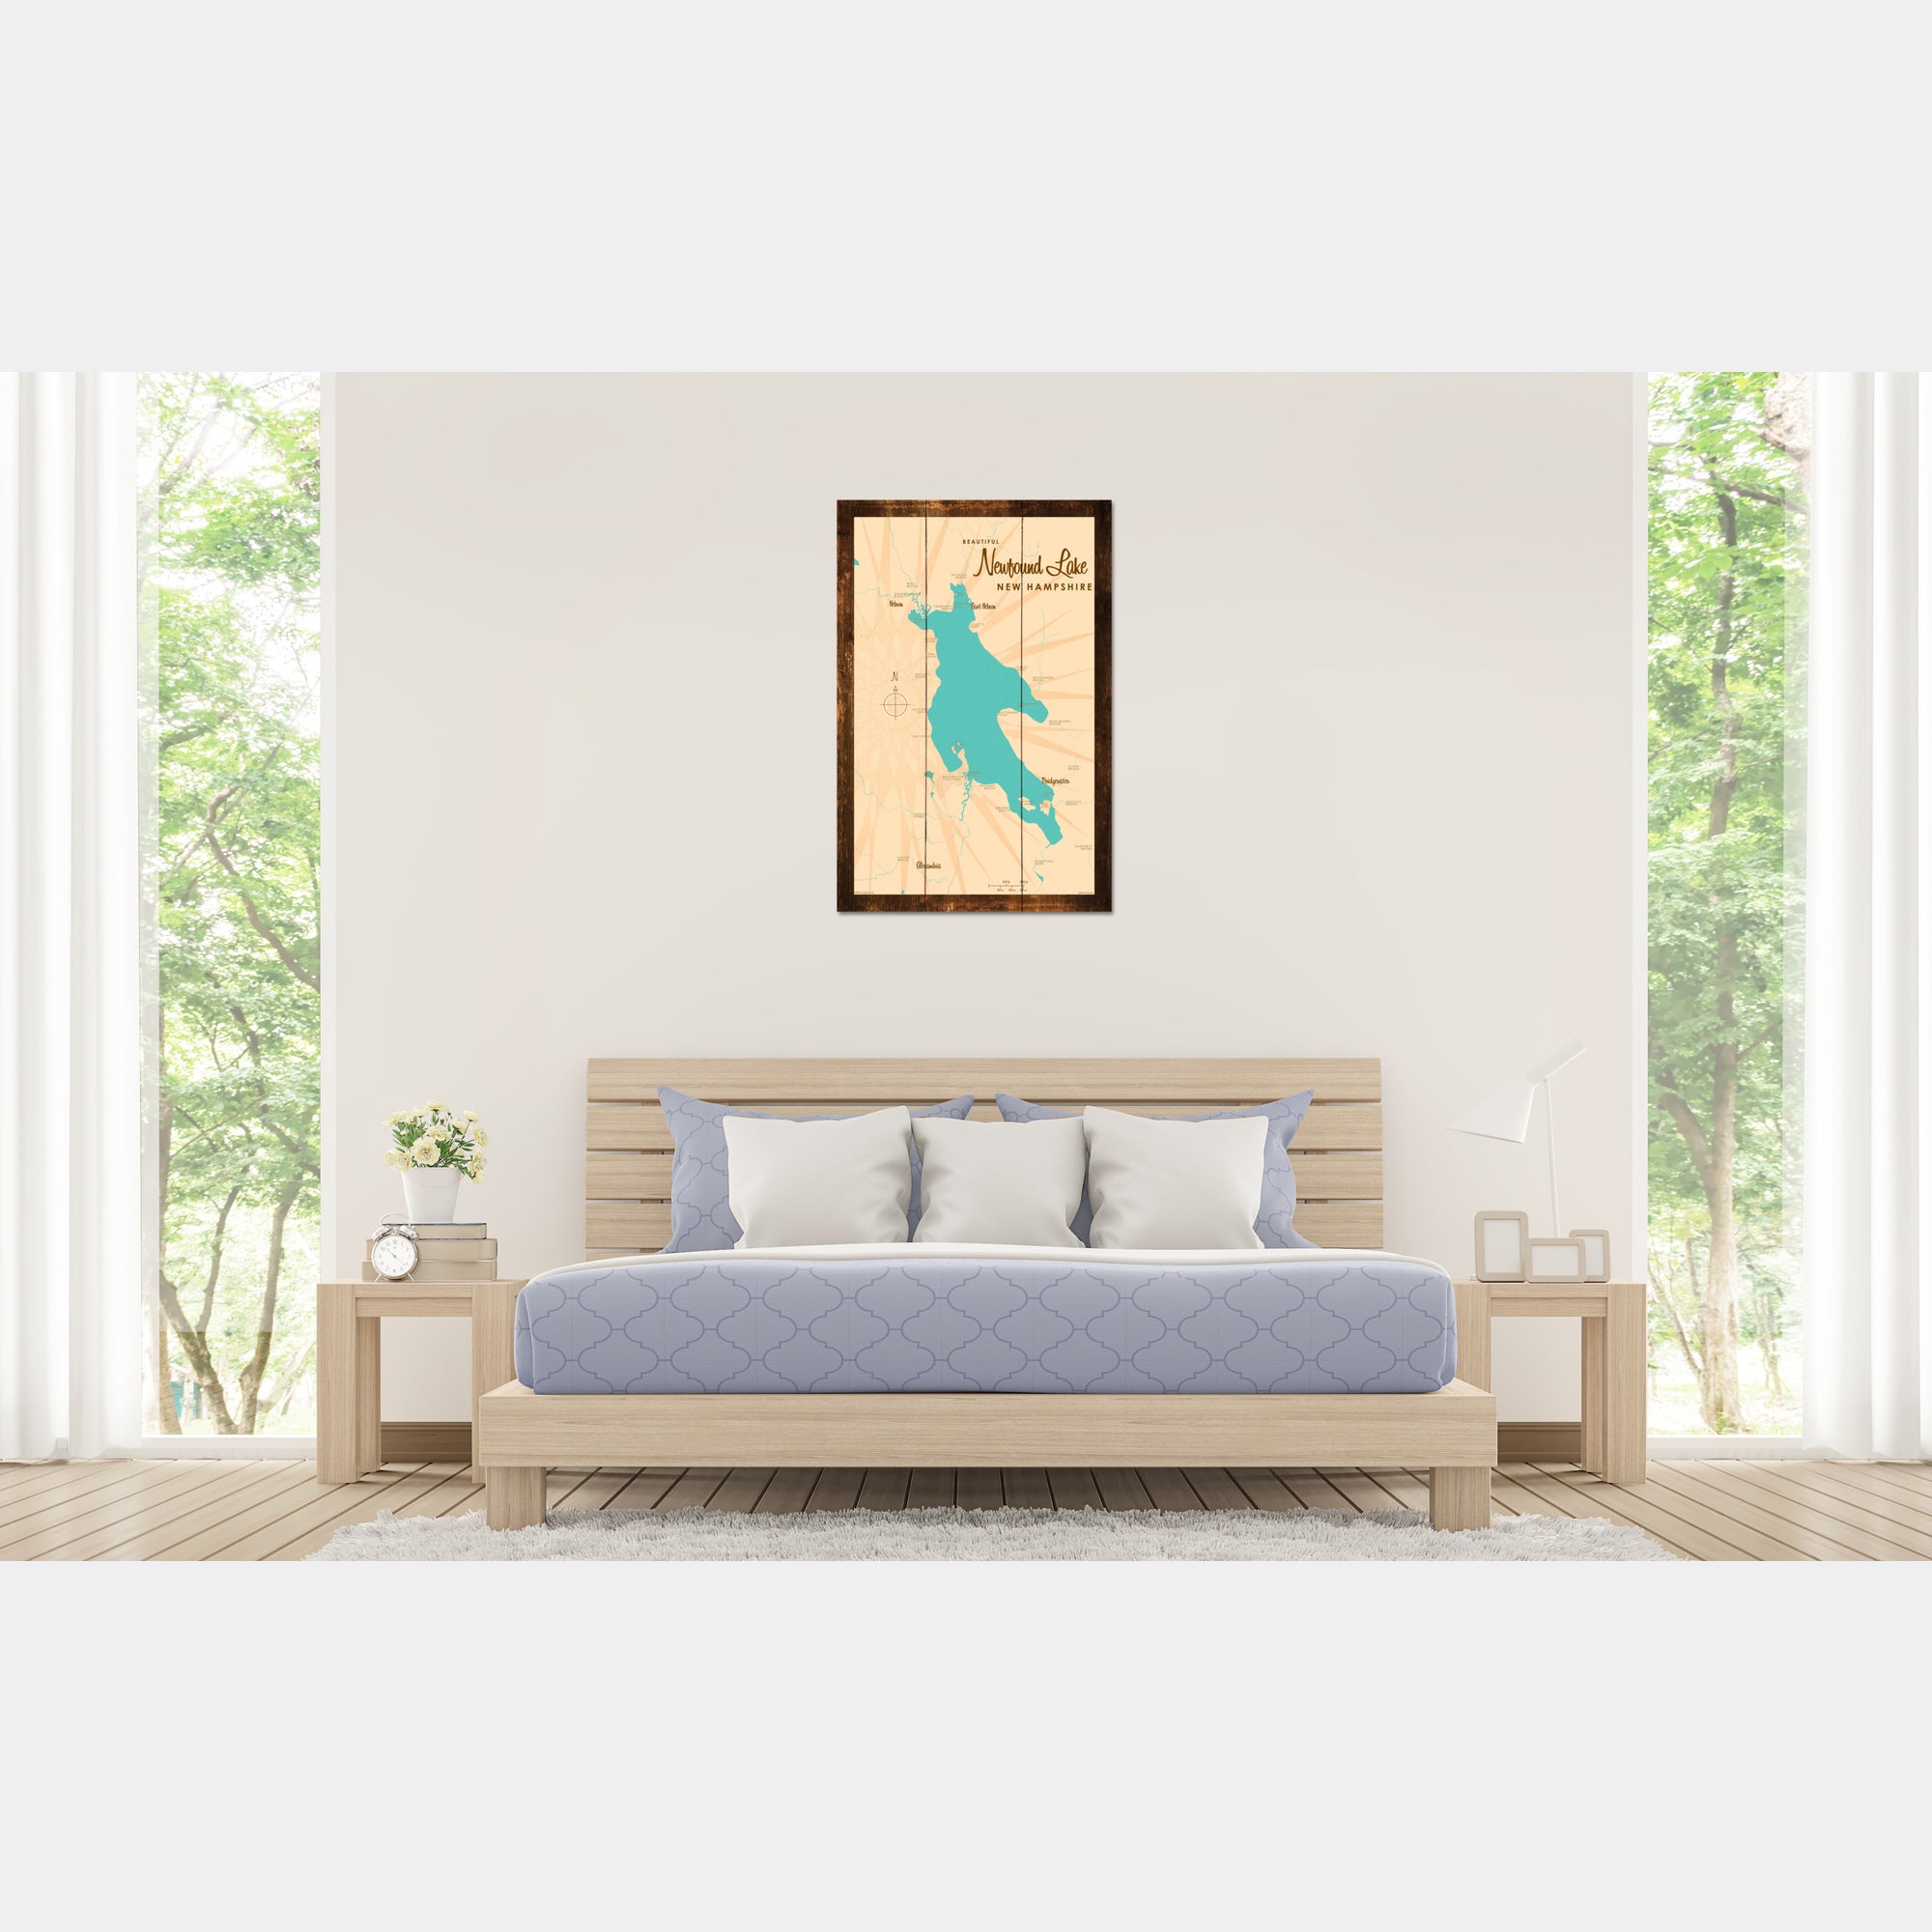 Newfound Lake New Hampshire, Rustic Wood Sign Map Art